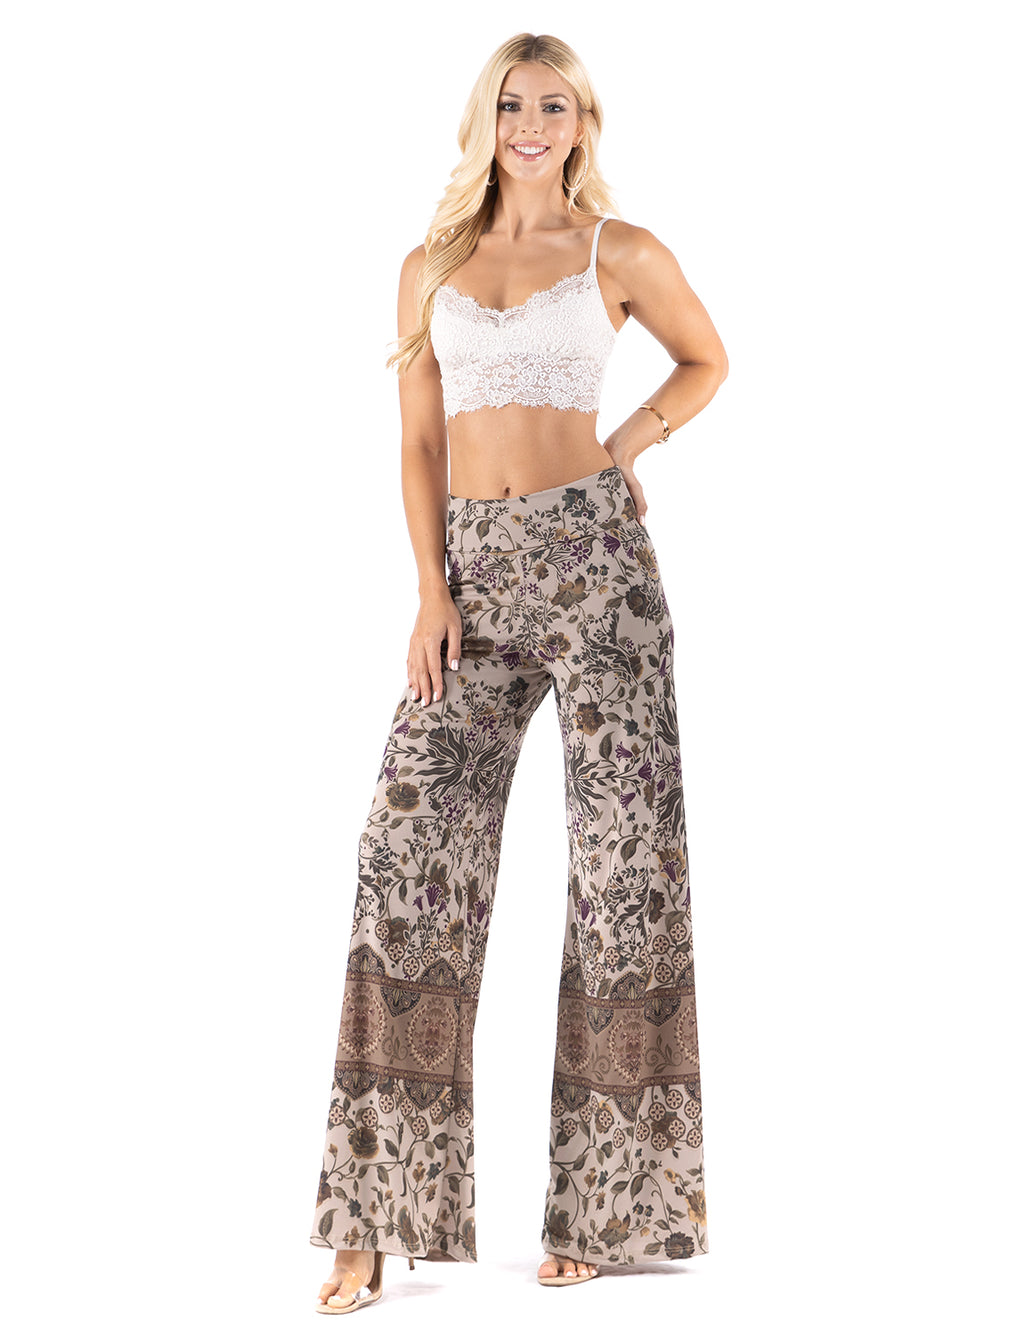 Tan Vintage Floral High waist palazzo pants featuring pockets, wide legs, and a comfortable stretchy fabric Perfect during spring, summer,Concerts, Festivals, Dance, Brunch